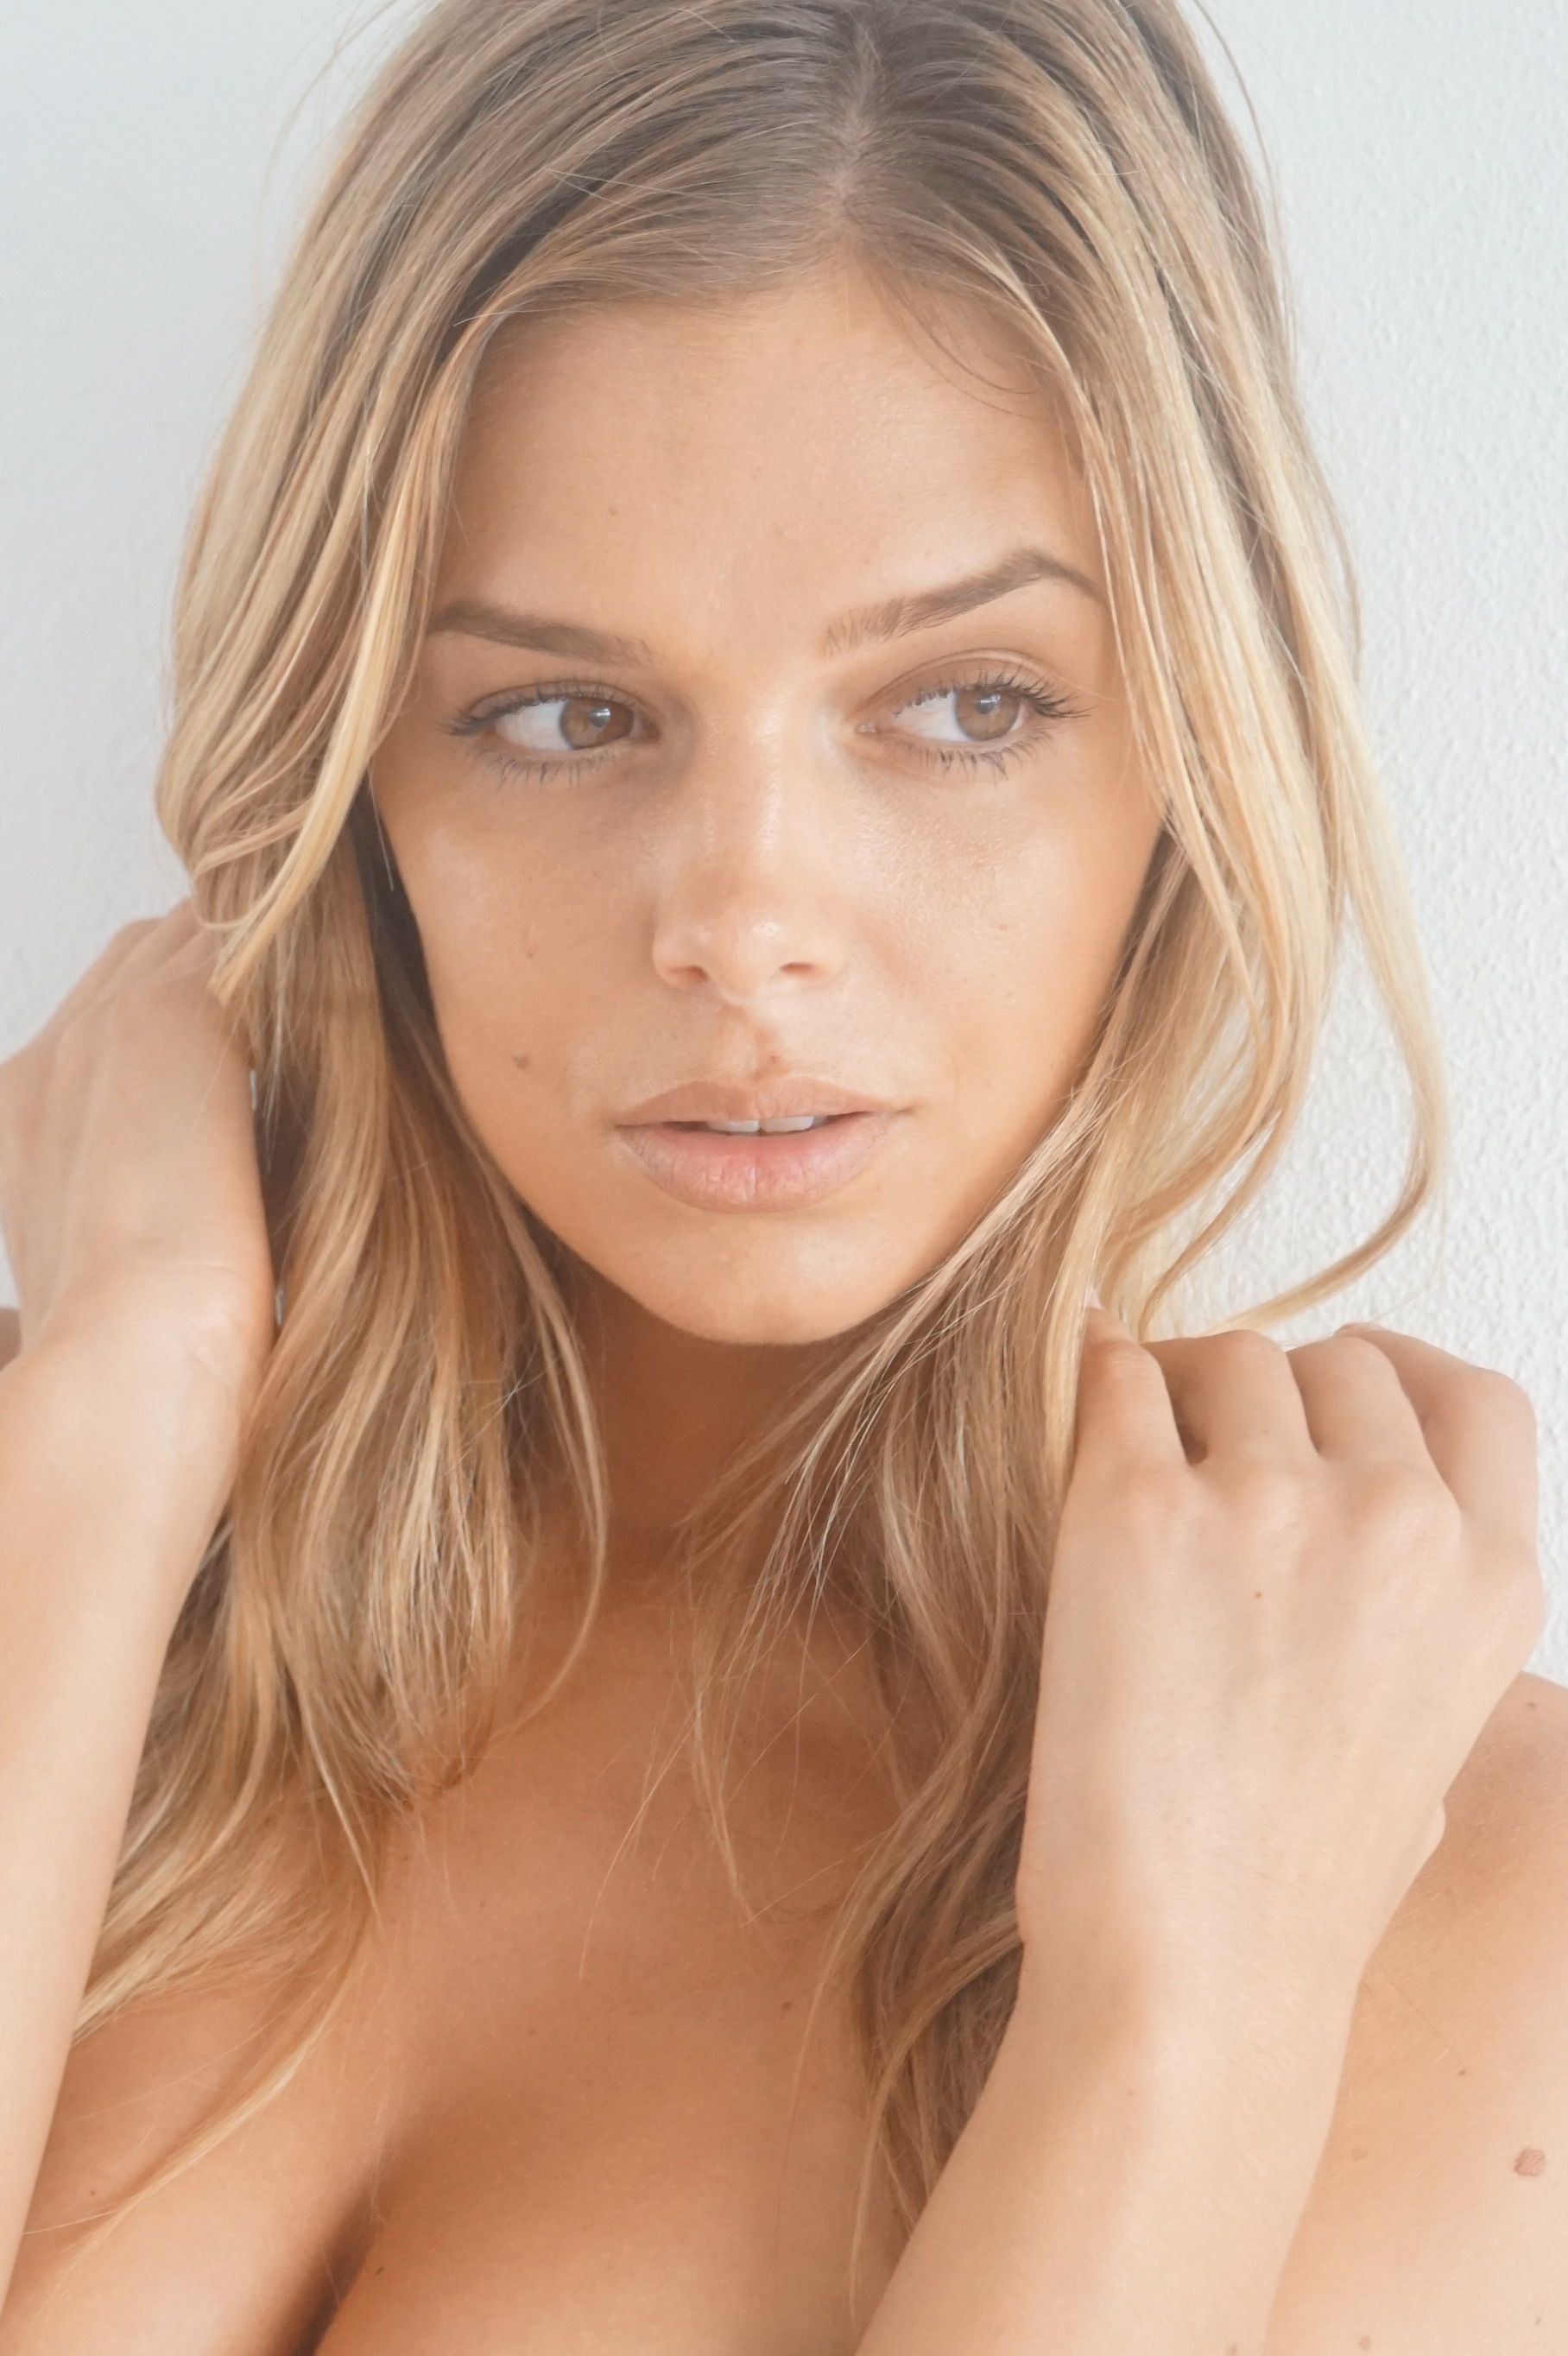 1677774663 479 Danielle Knudson Nude TheFappening 227 - Danielle Knudson Nude Leaked (Over 200 Photos!)